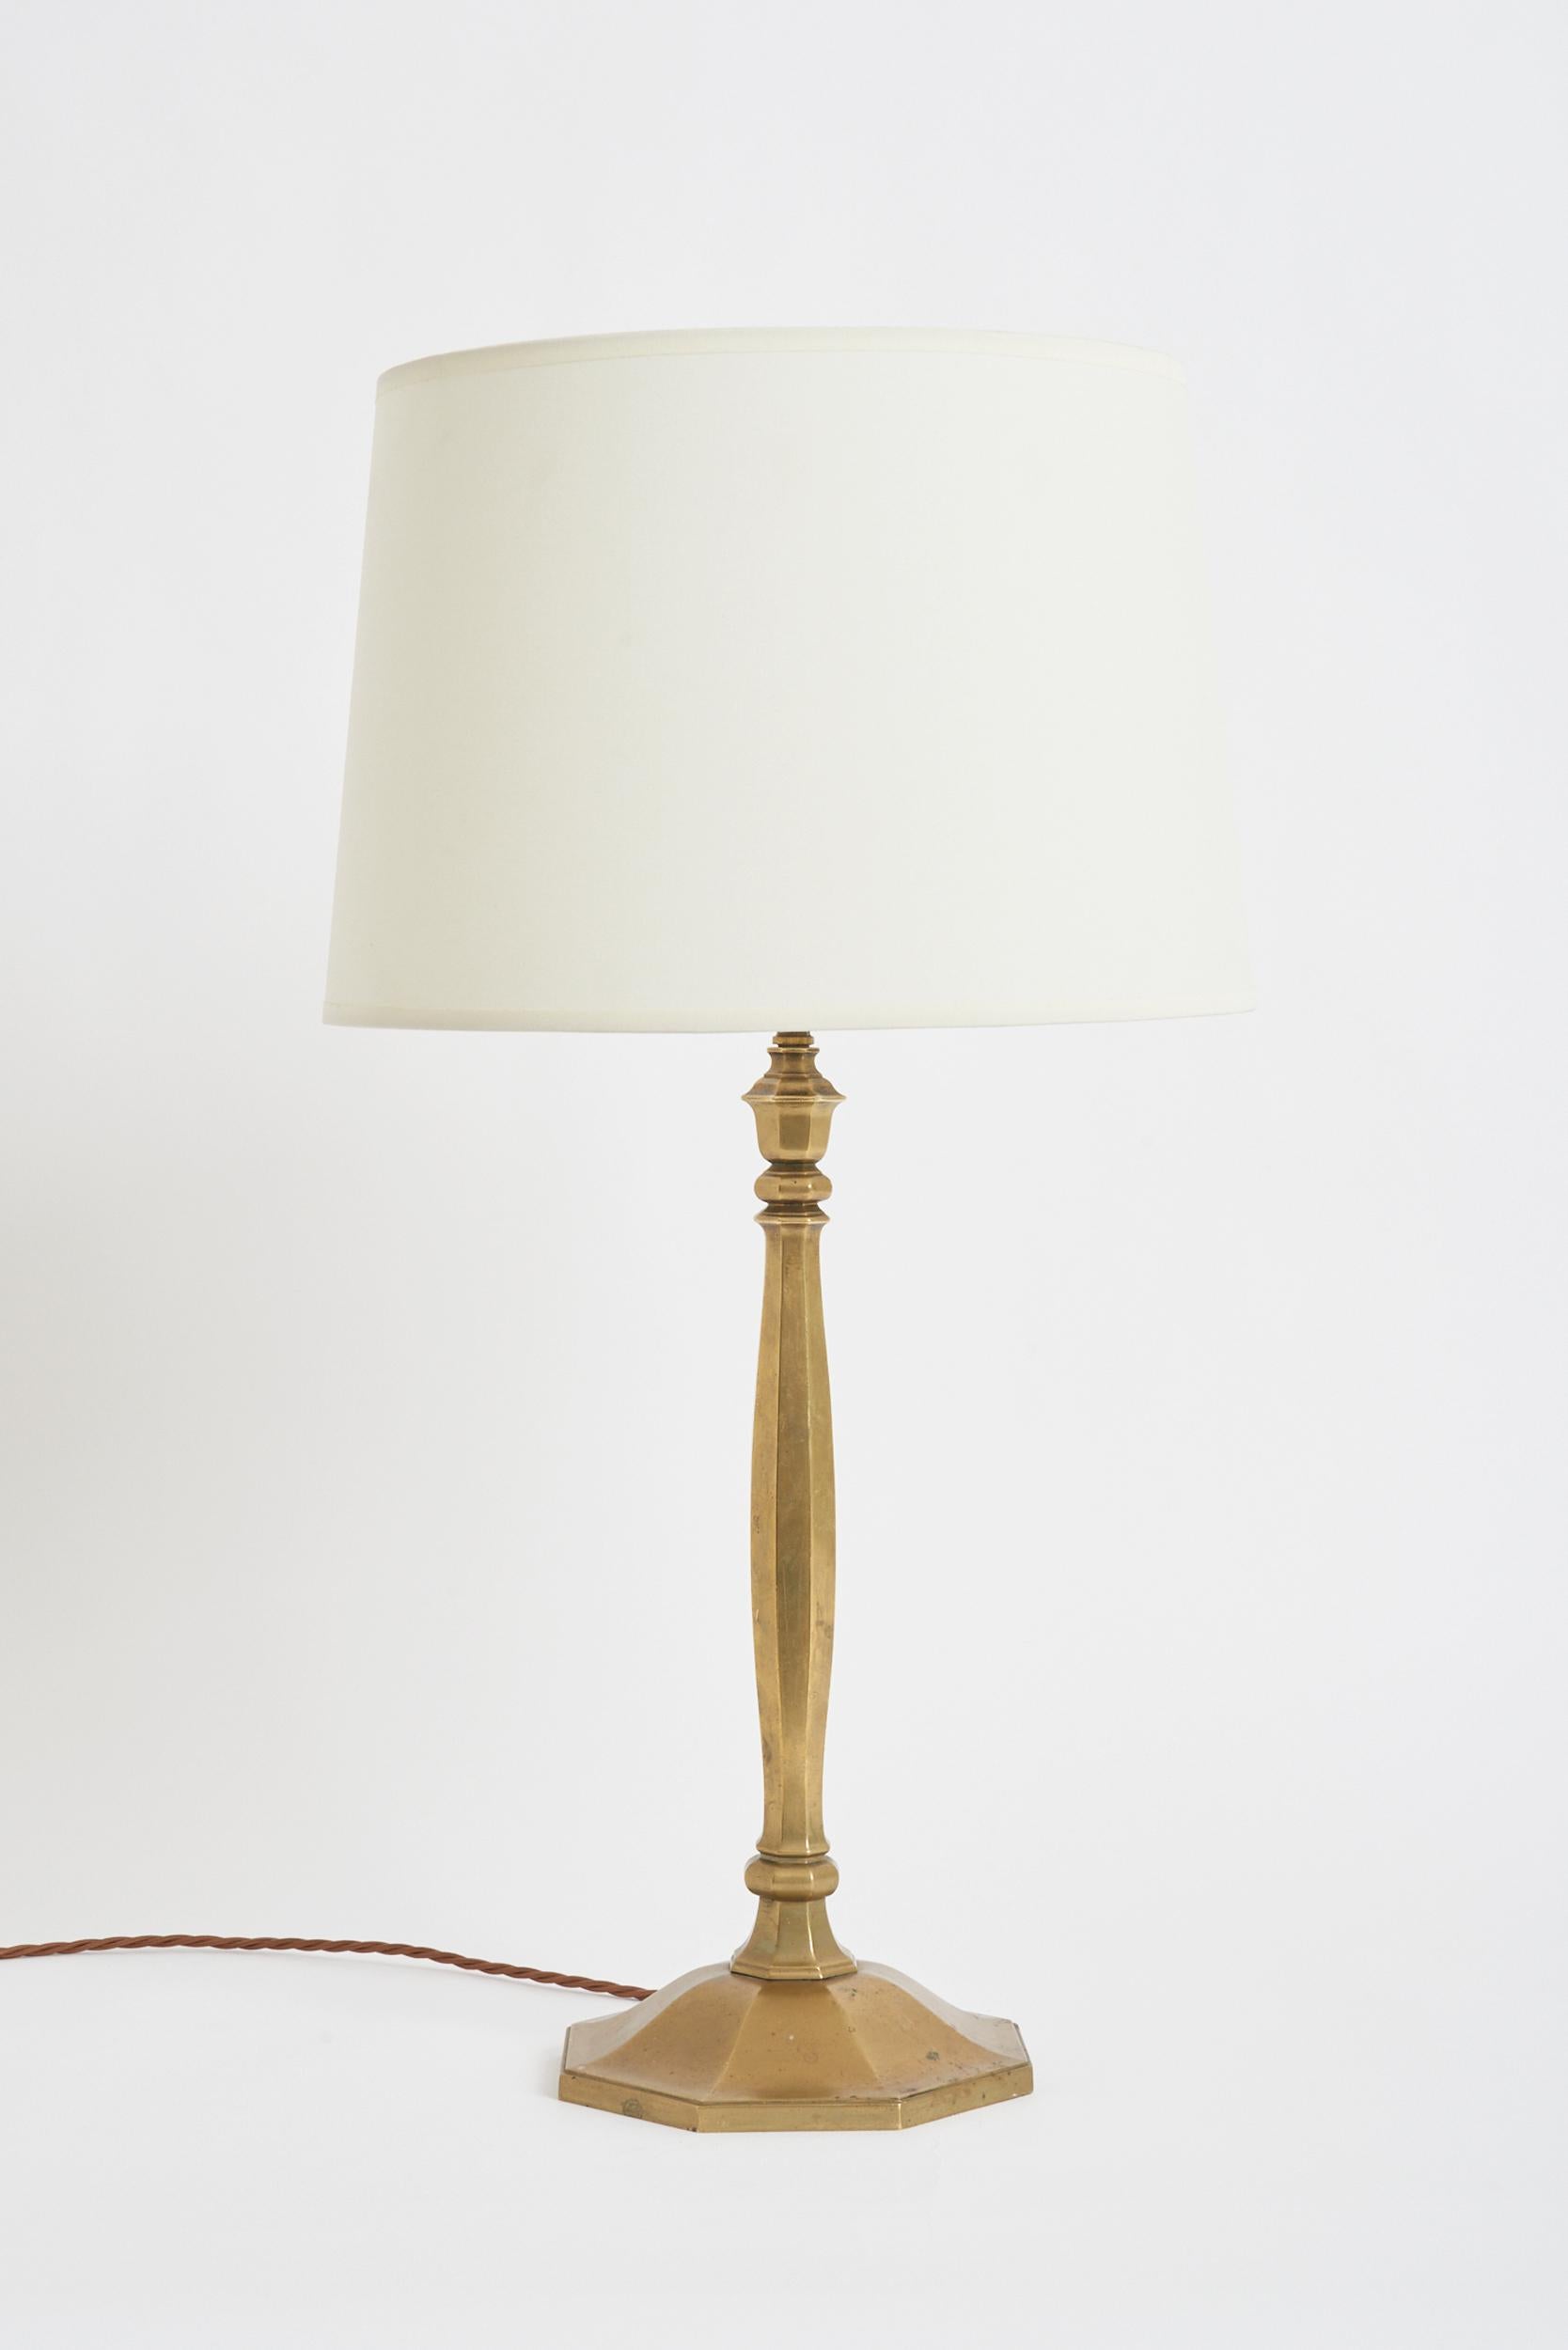 An Art Deco bronze table lamp
France, circa 1920
With the shade: 66 cm high by 35.5 cm diameter
Lamp base only: 47 cm high by 19 cm diameter.